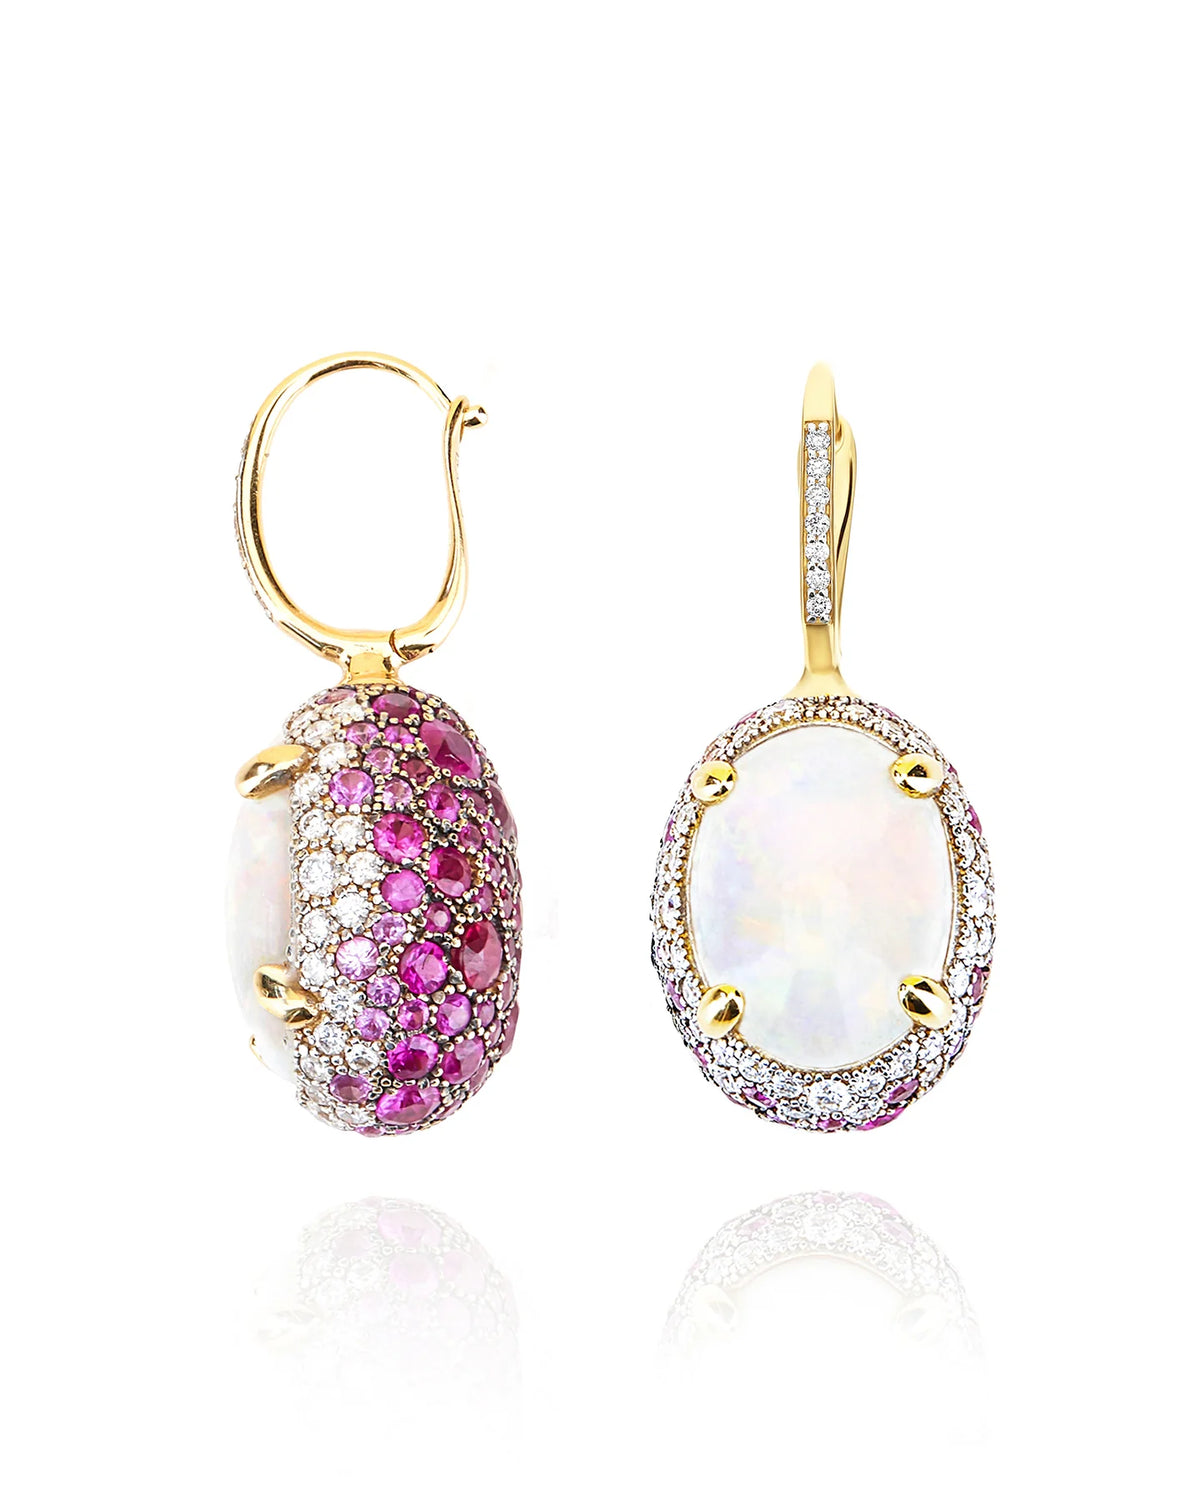 Nanis Reverse Gold, Pink Sapphires, Rubies, White Australian Opal and Diamonds Double Face Ball Drop Earrings (Large) - Orsini Jewellers